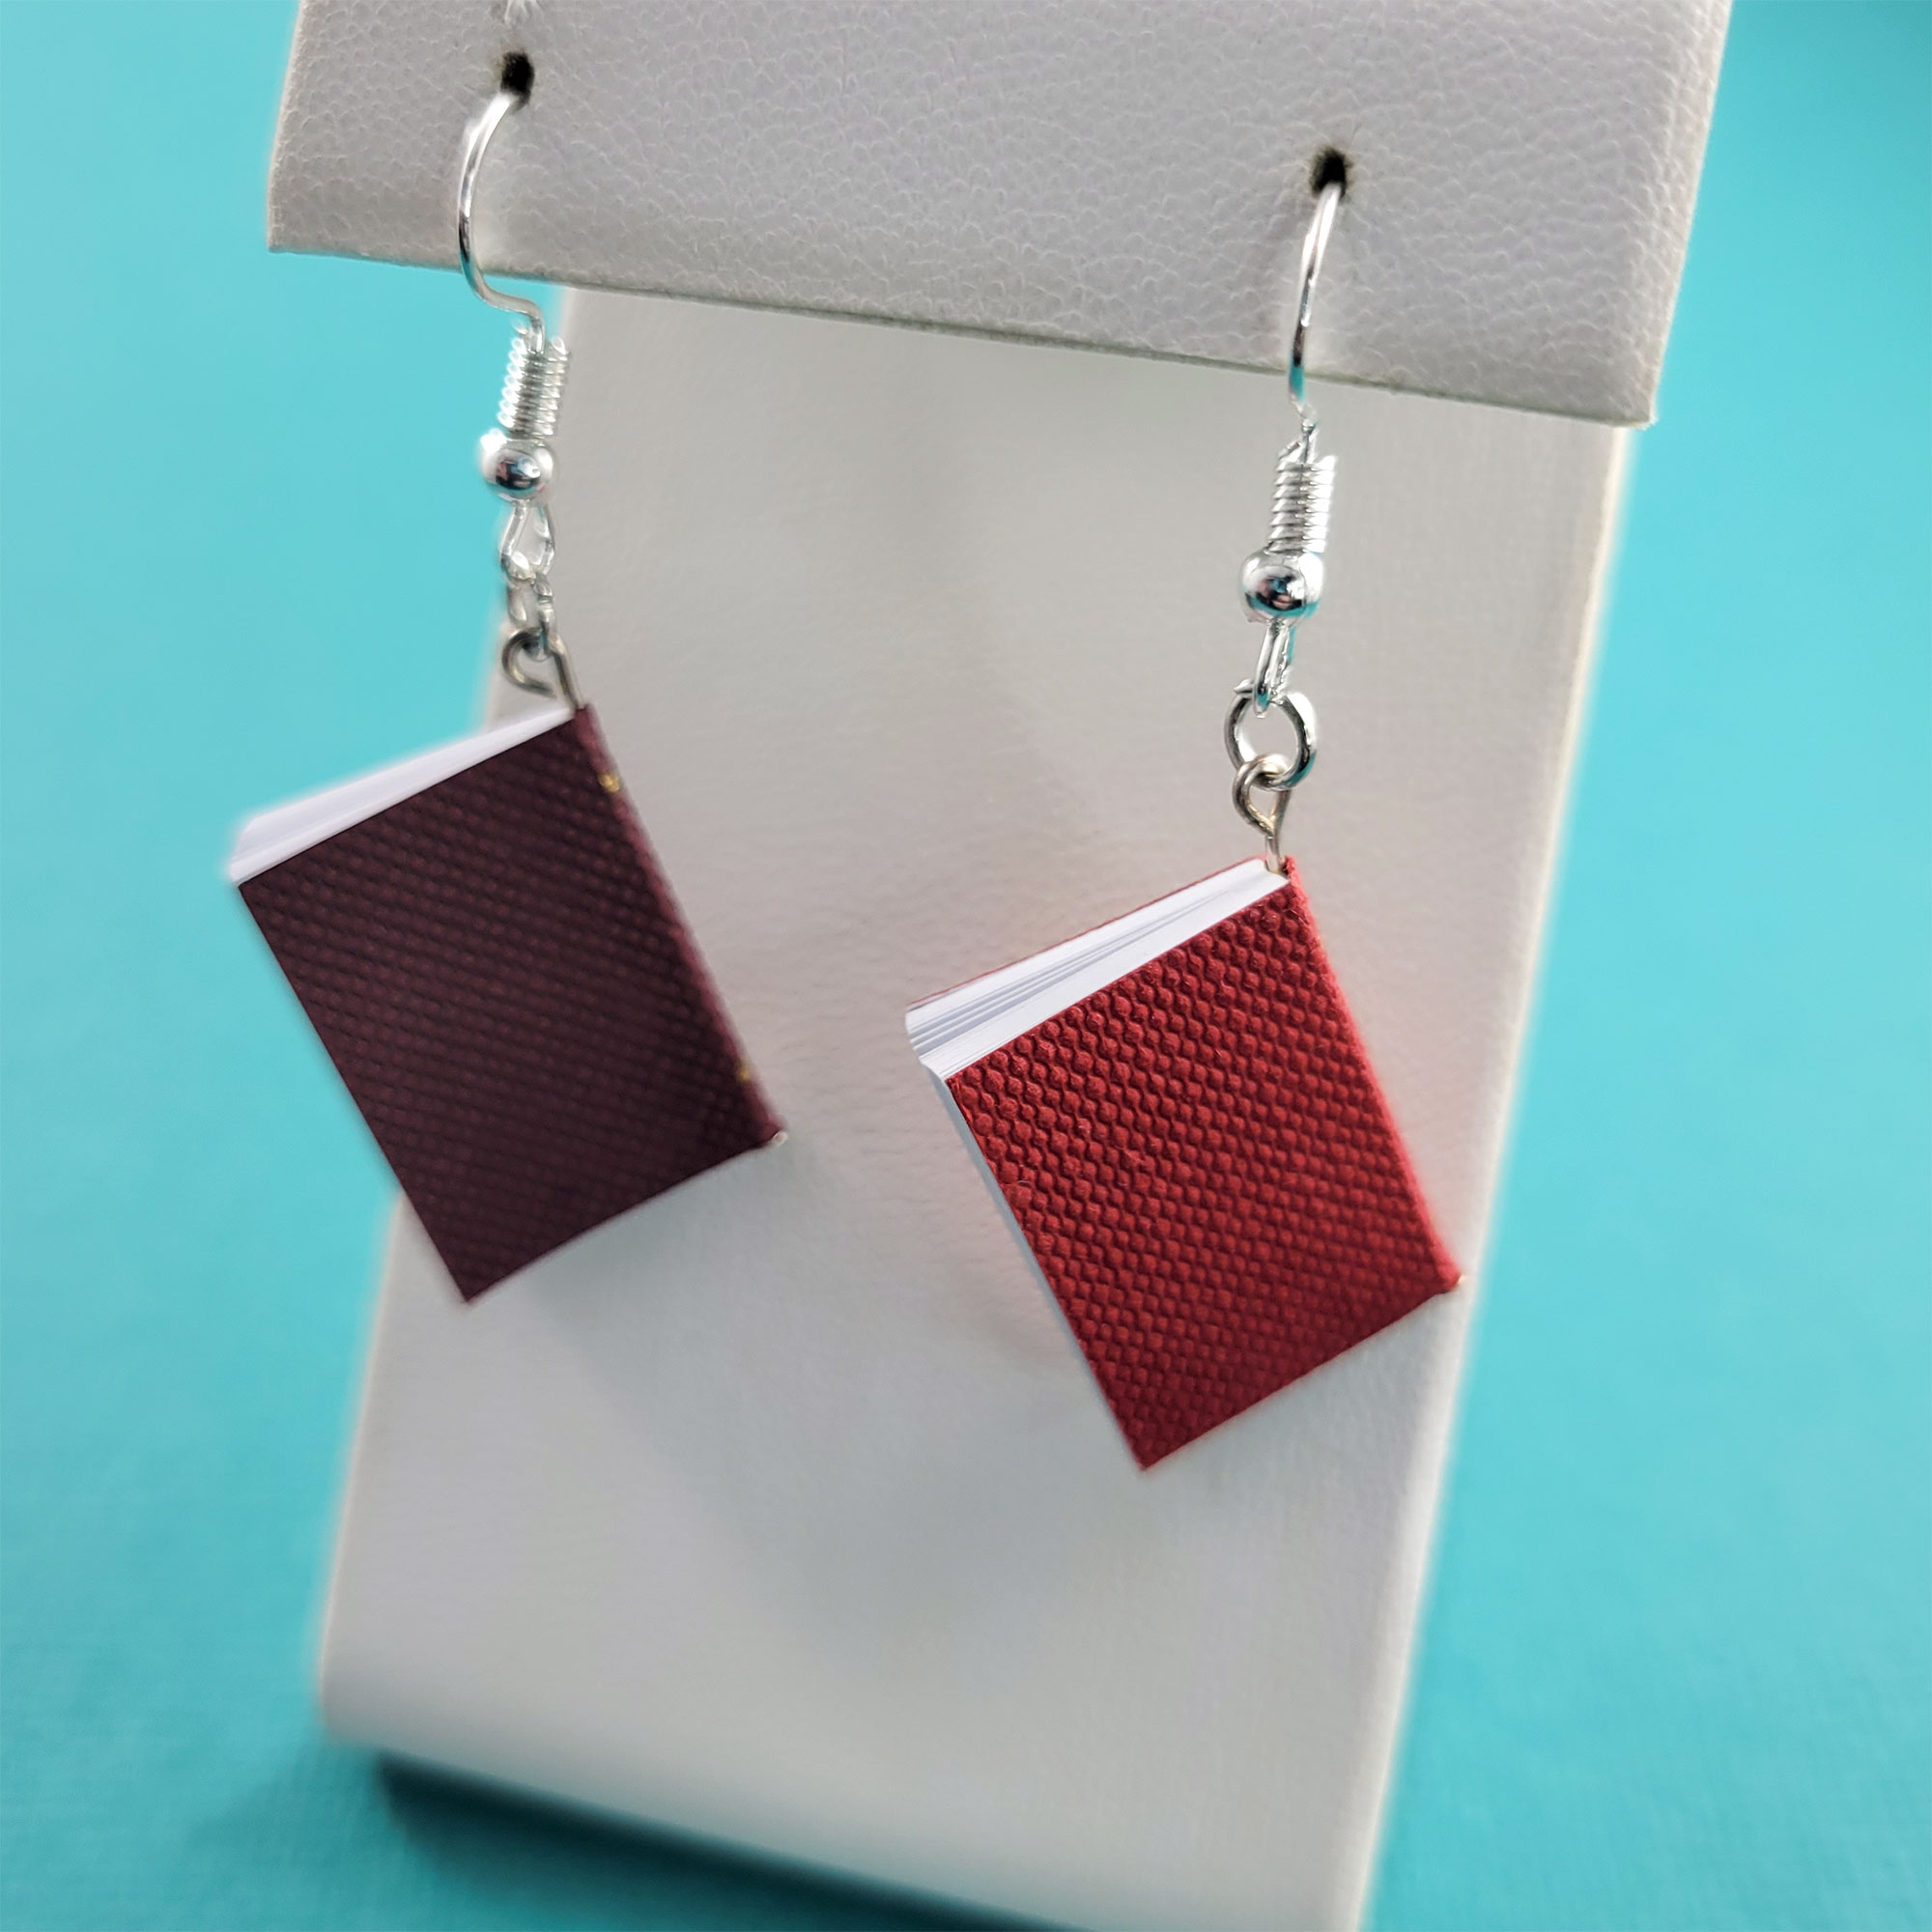 Write Your Own Story Book Earrings by Wilde Designs